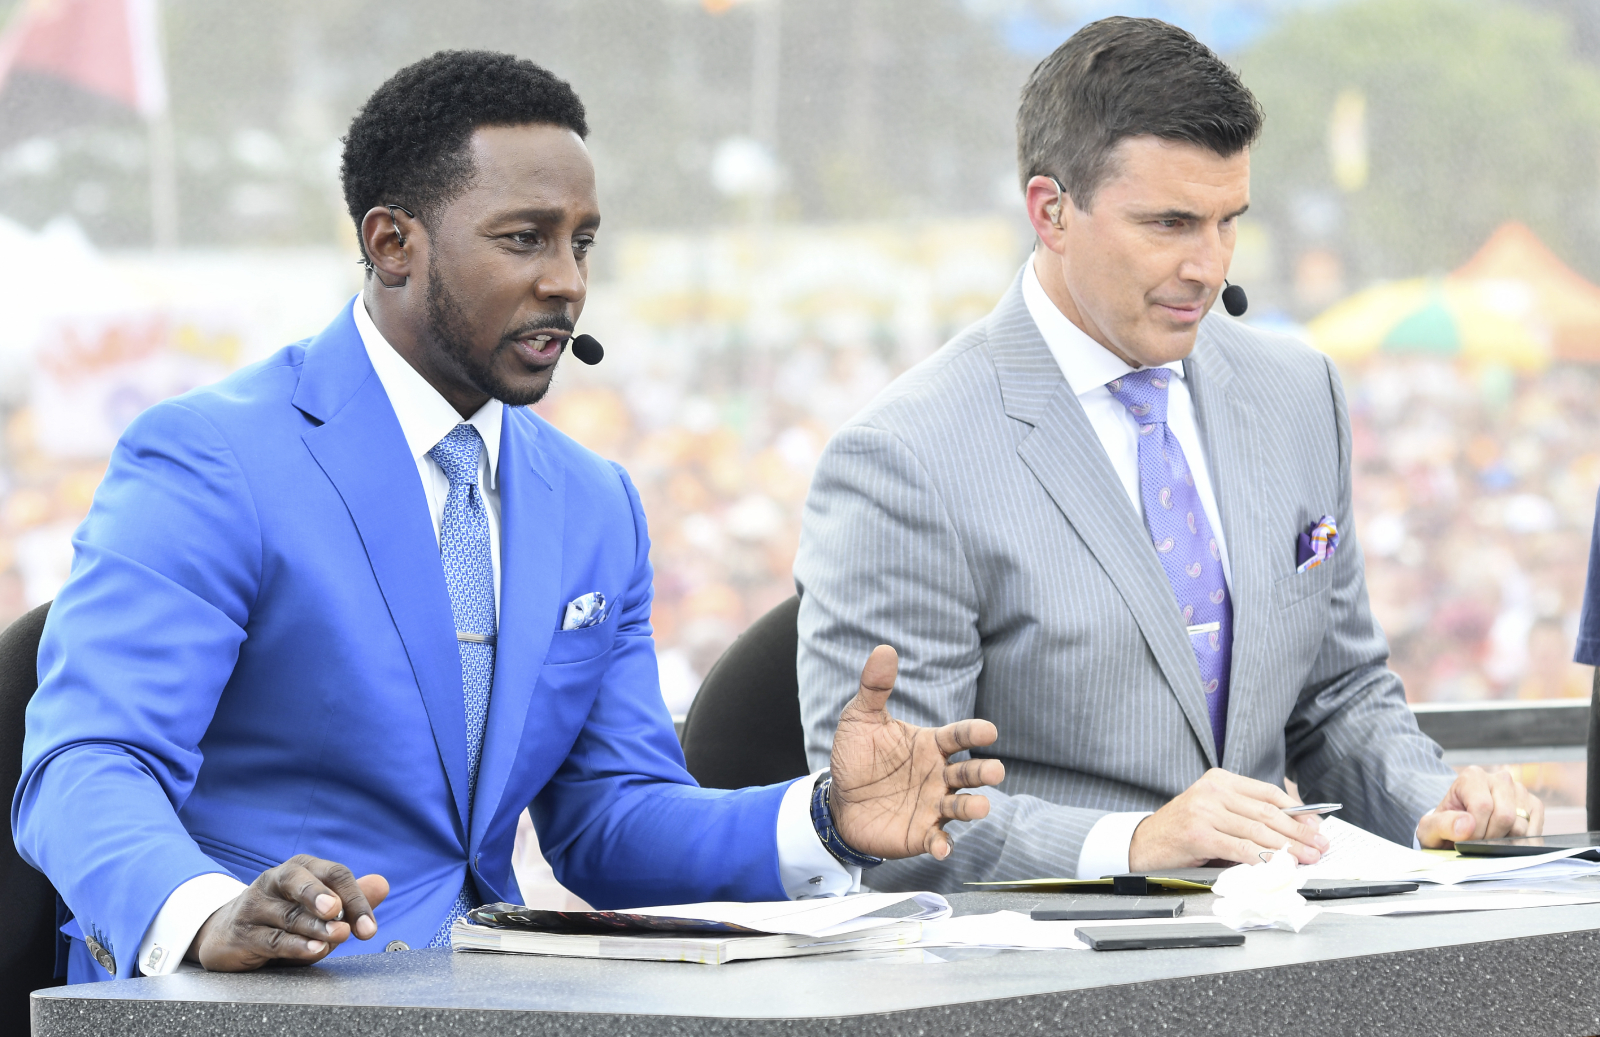 Desmond Howard was a pretty good football player, and is now a successful analyst on ESPN's College GameDay. What is his net worth?